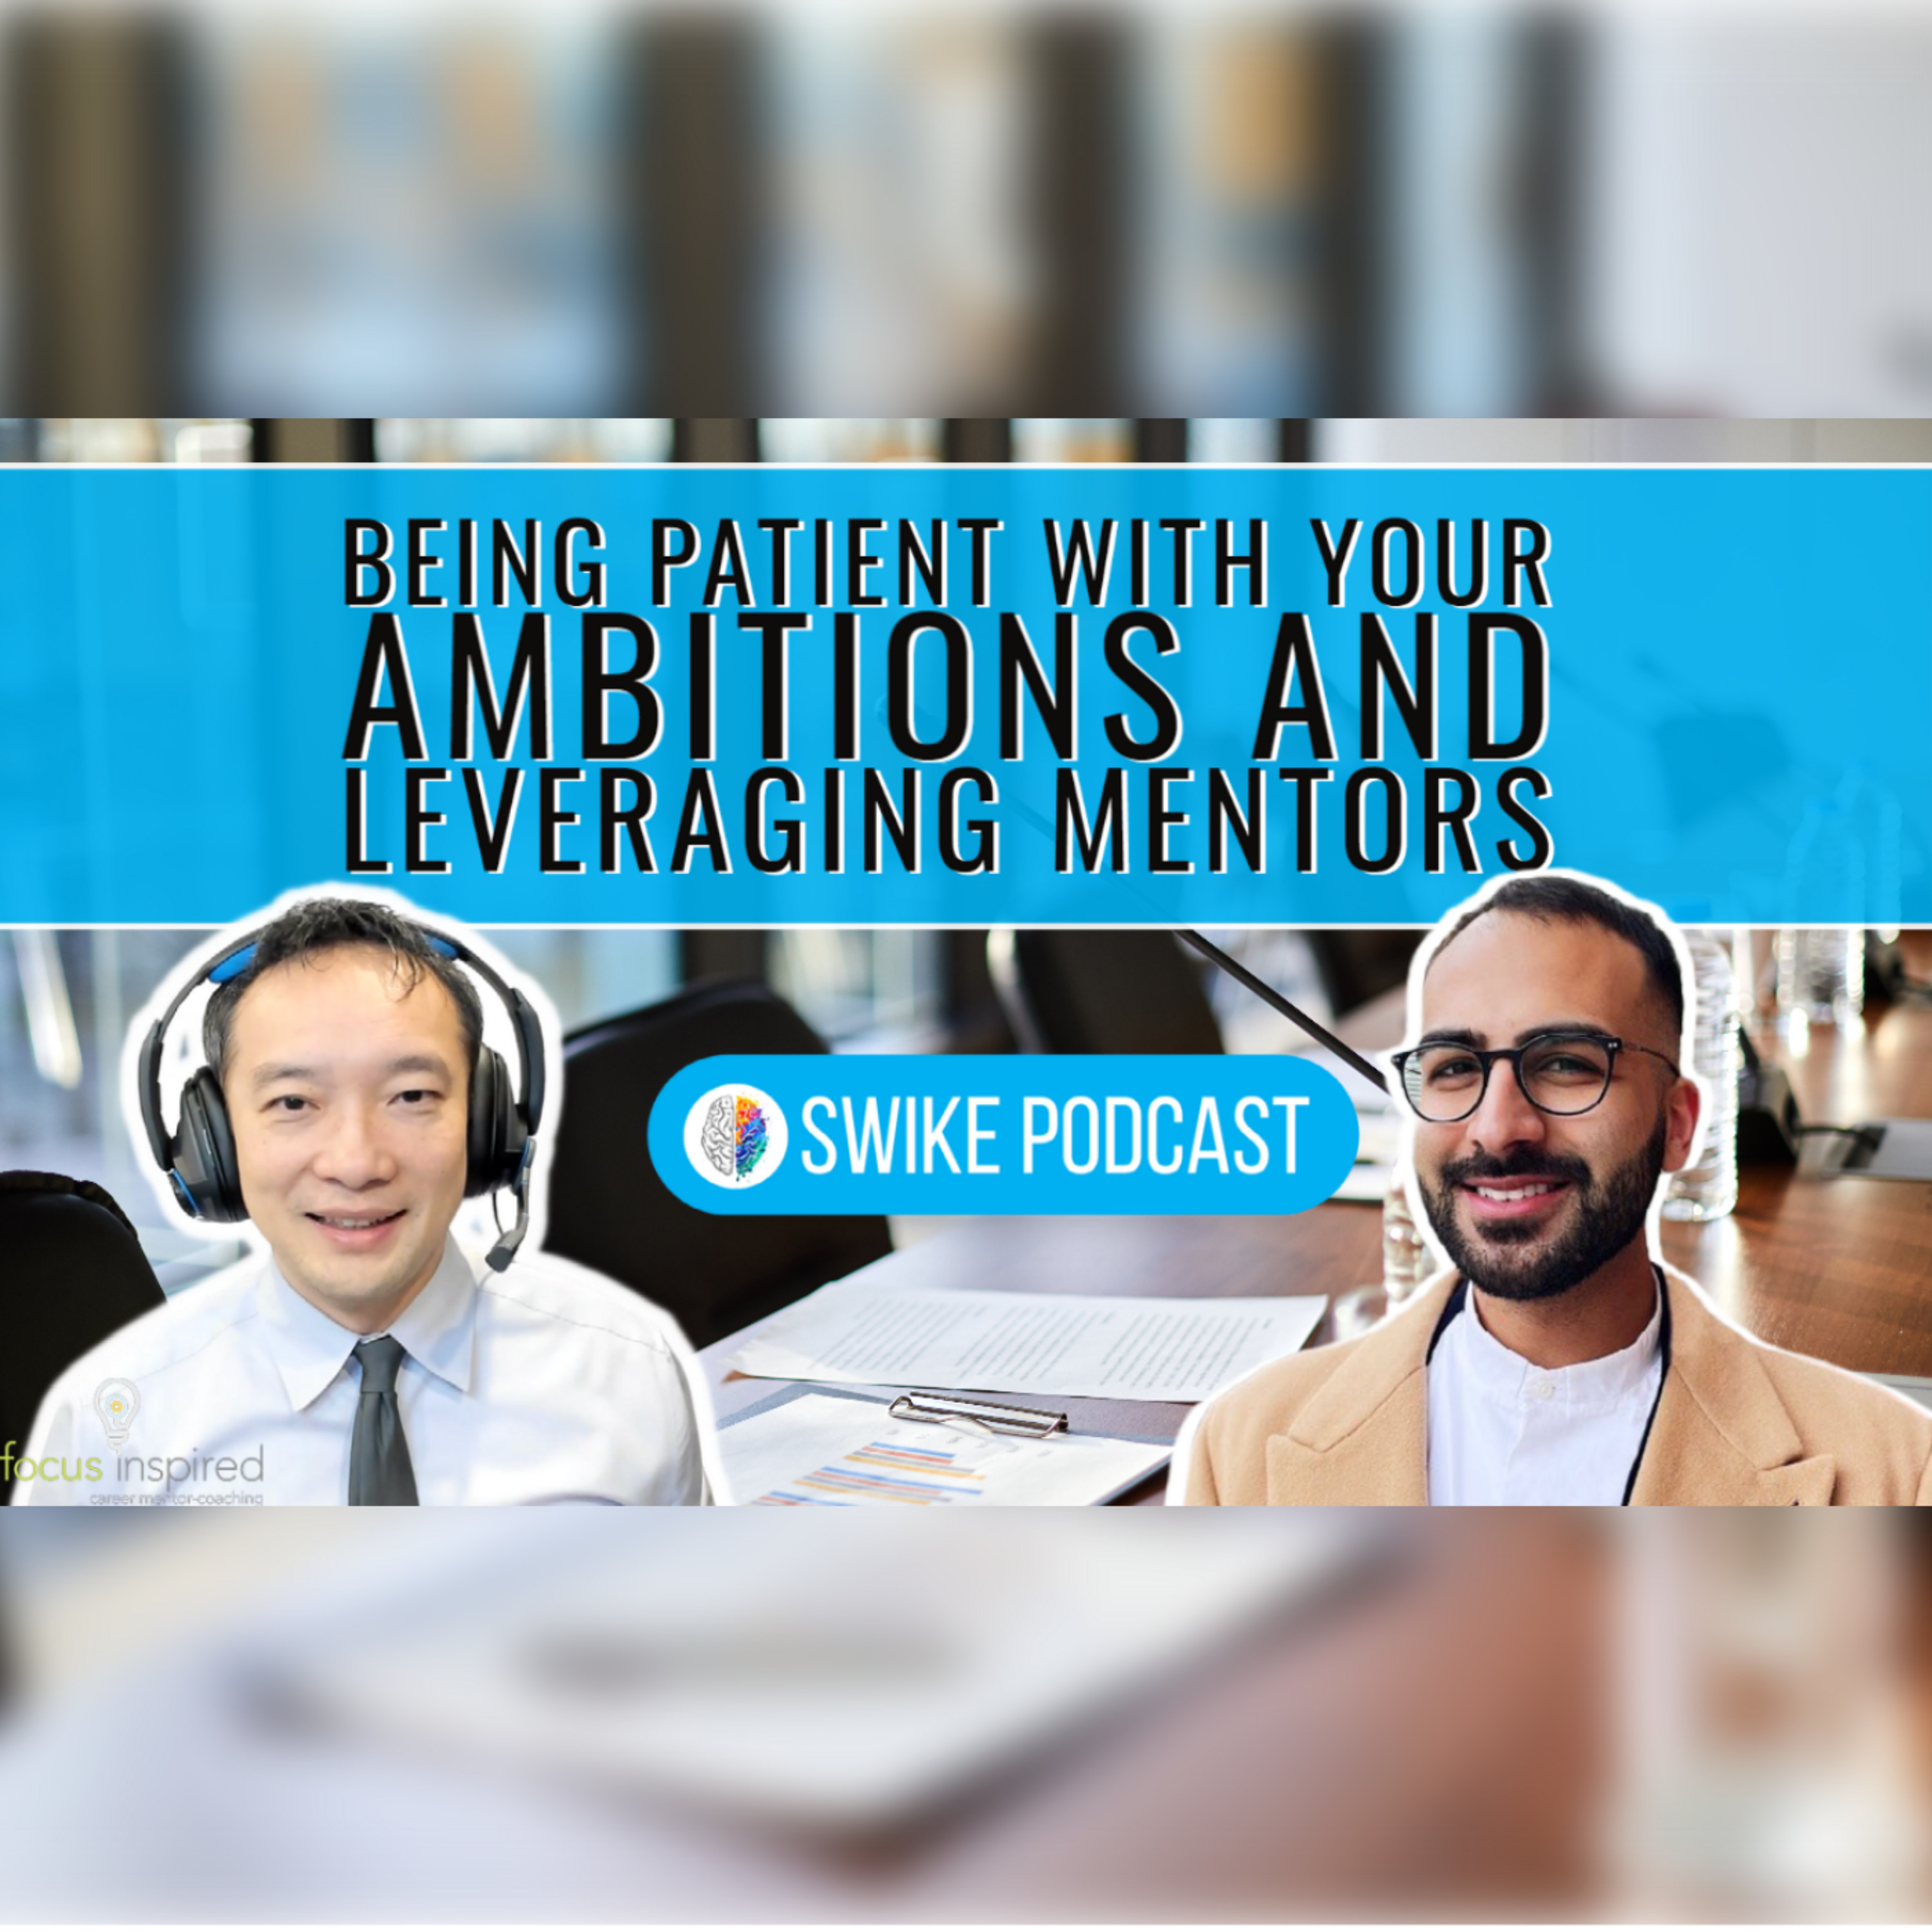 Being patient with your ambitions and leveraging mentors